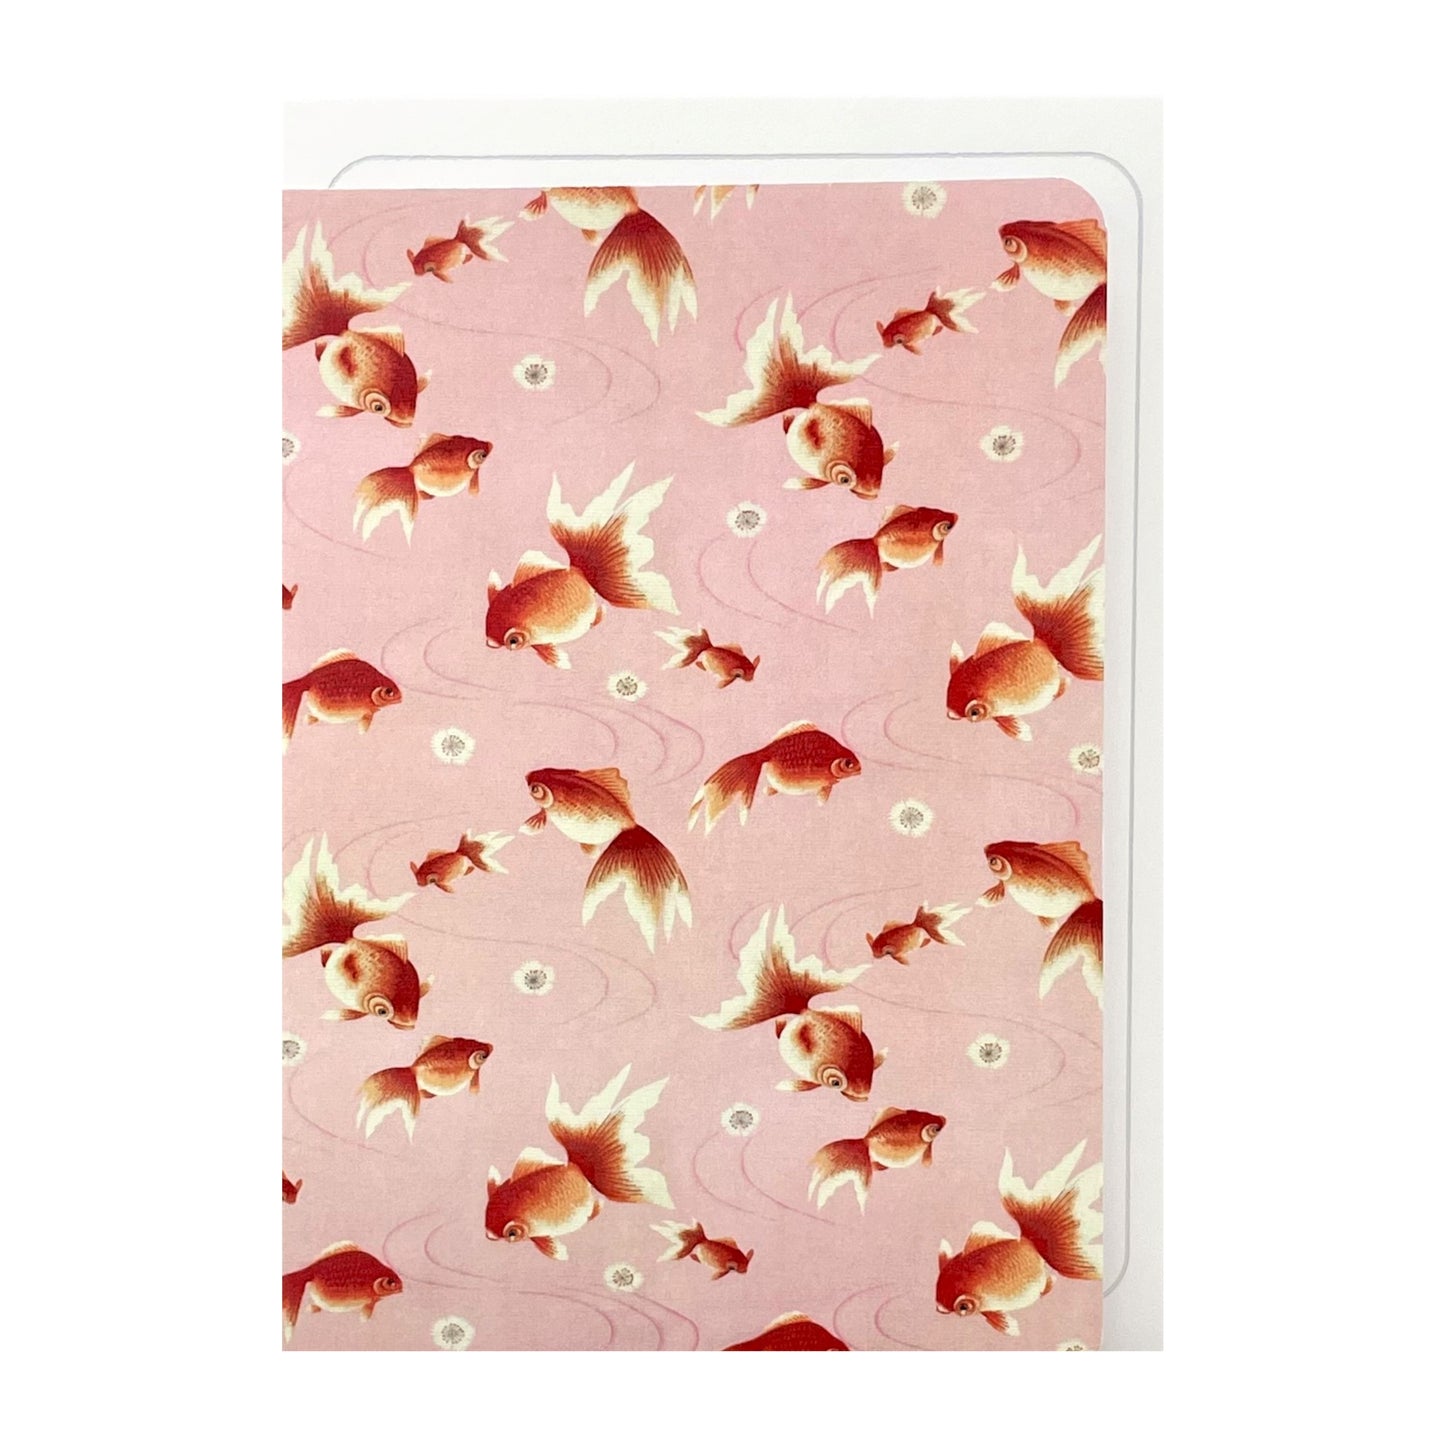 greetings card with repeat pattern of orange goldfish and pink backdrop by Ezen Design